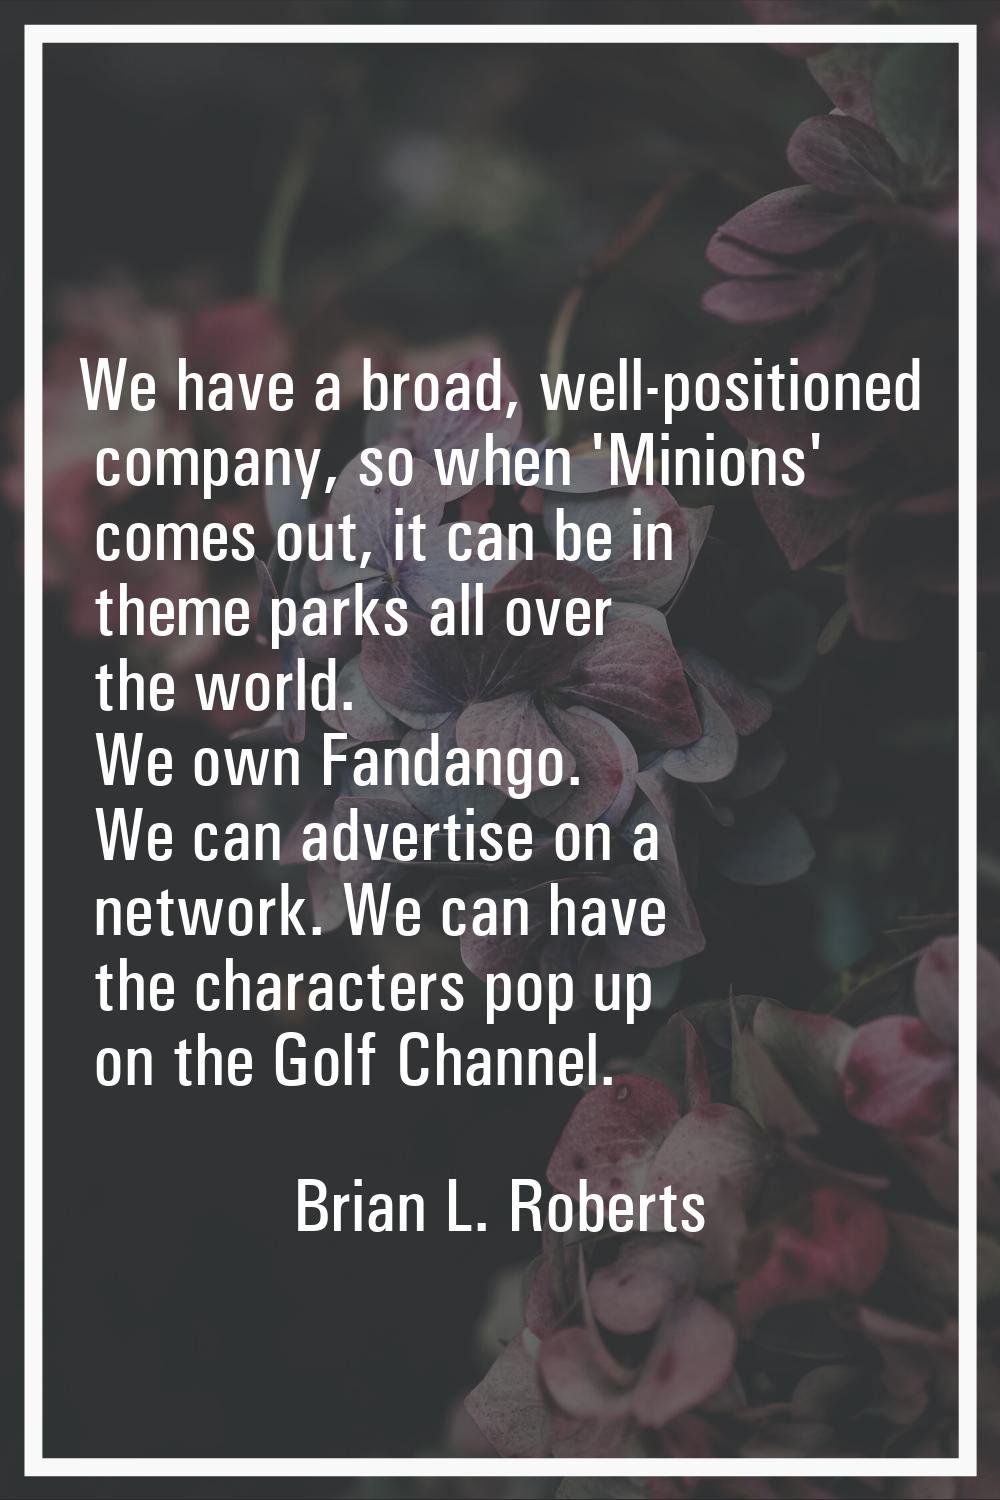 We have a broad, well-positioned company, so when 'Minions' comes out, it can be in theme parks all